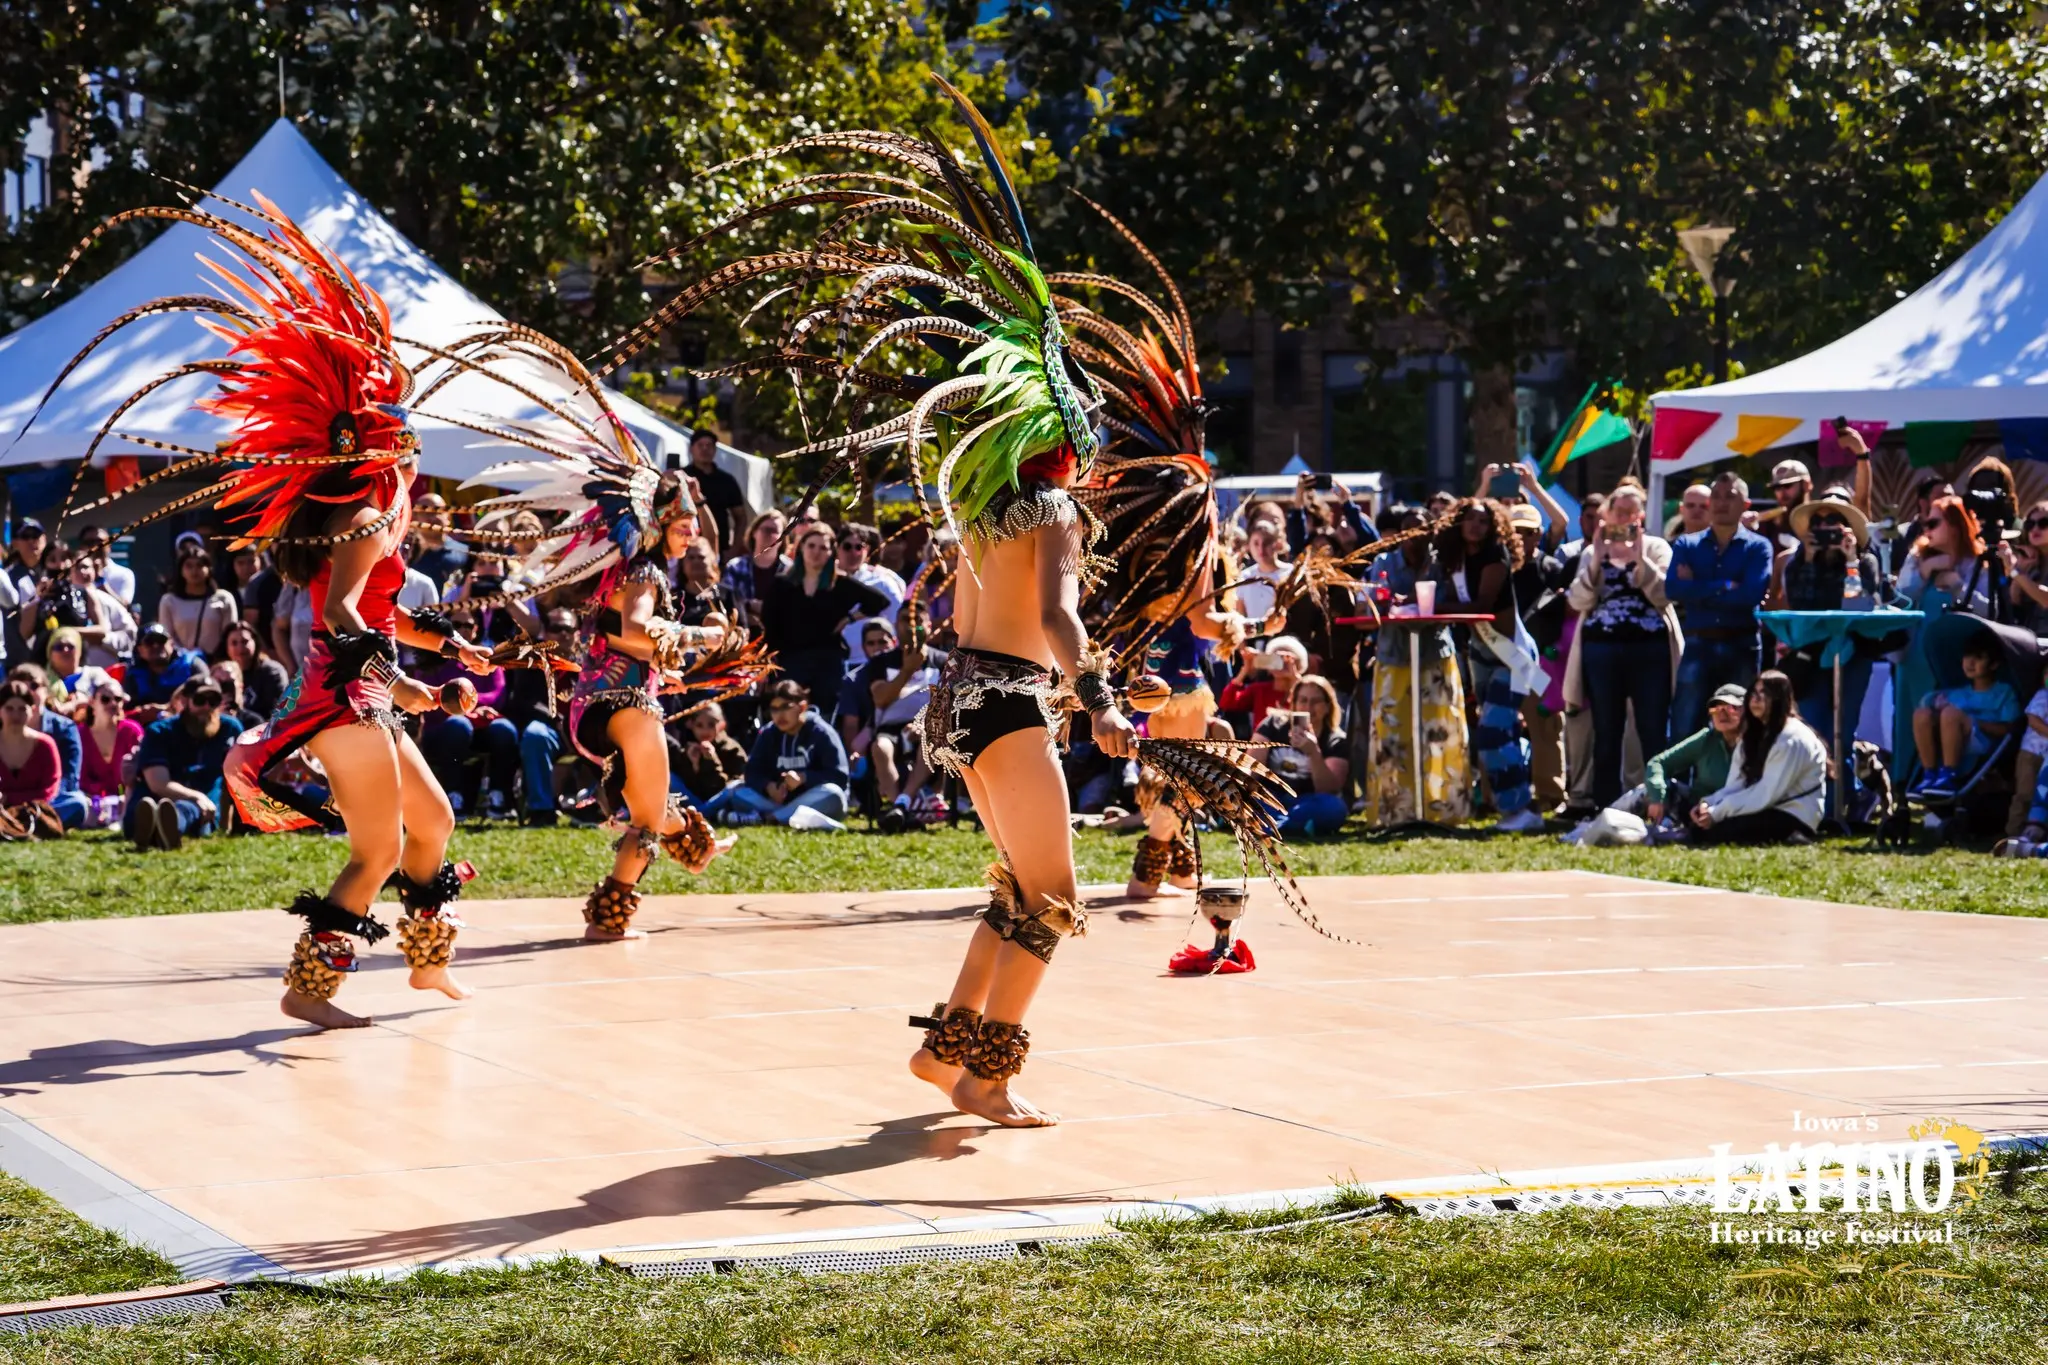 Four male dancers in traditional Latino clothes dance on a cement pad before a crowd.